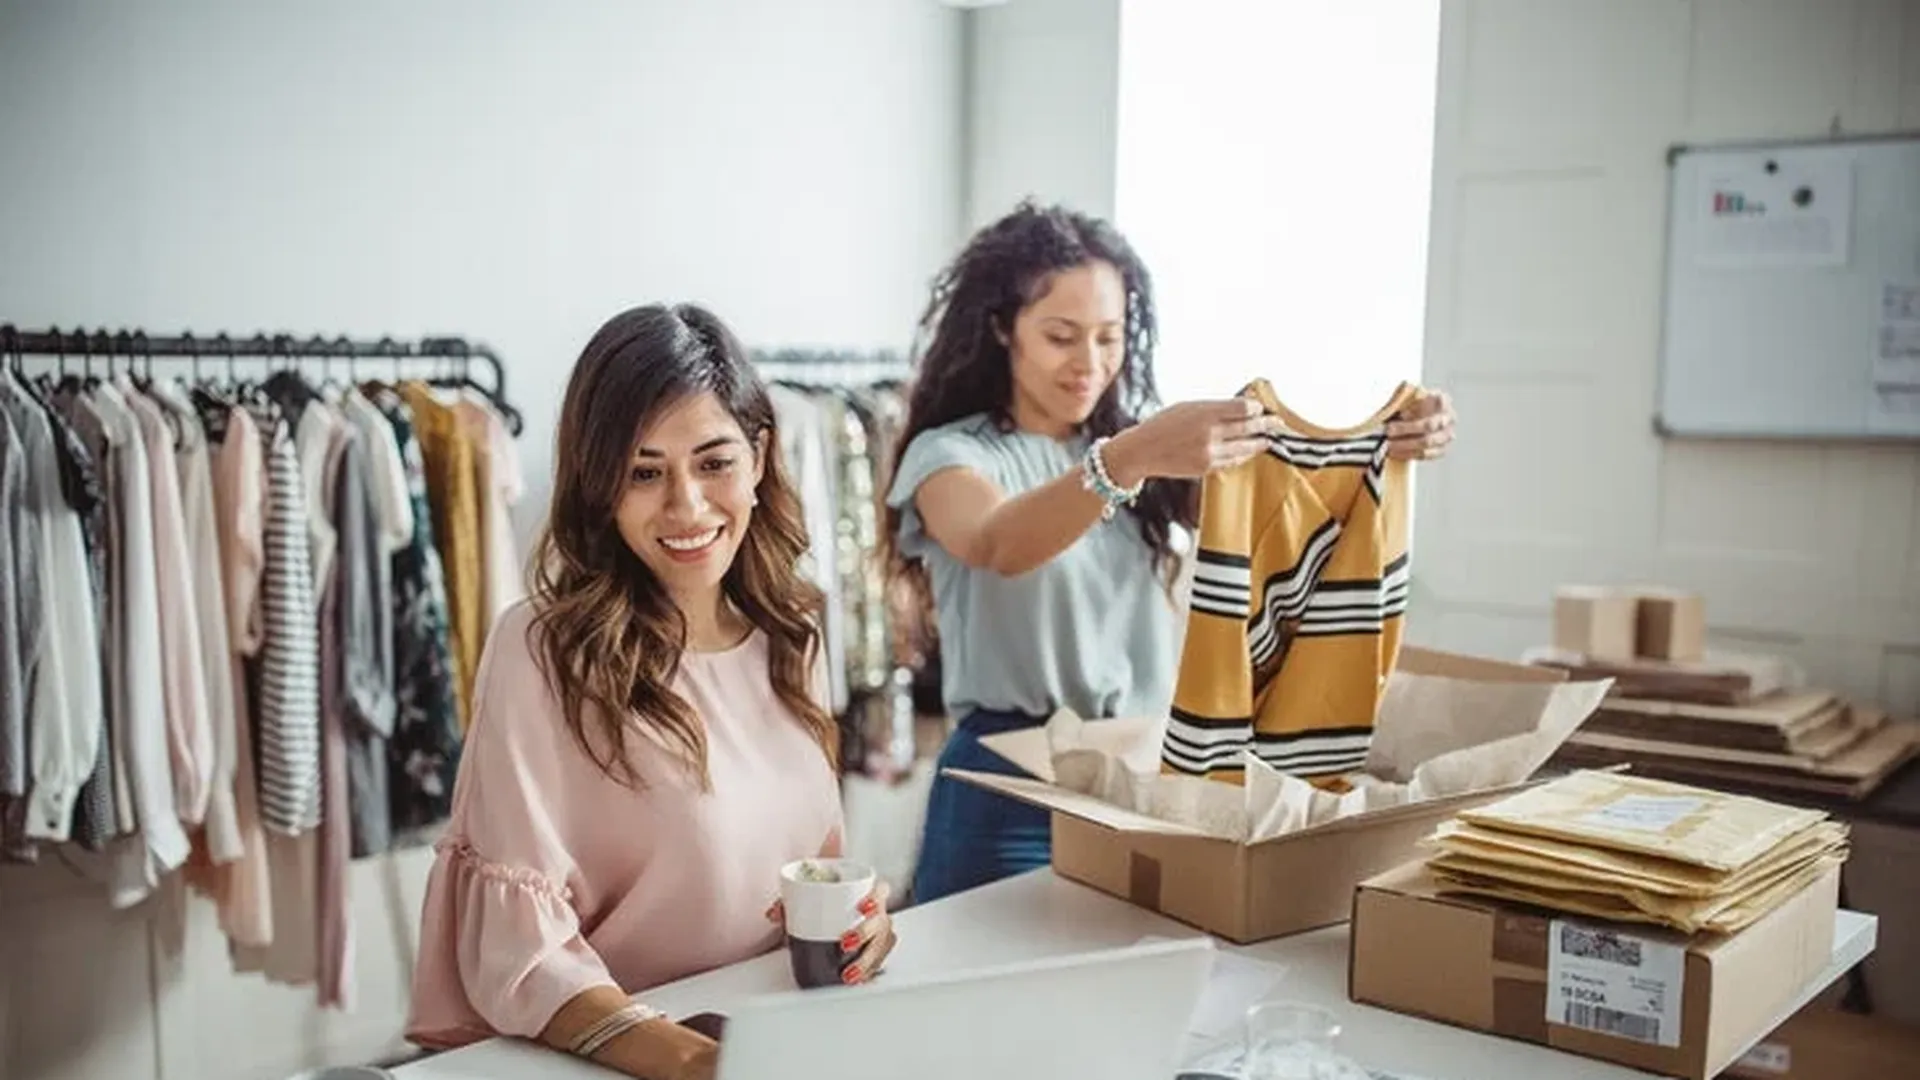 two_women_business_owners_packing_clothes_bA7qC0I.webp